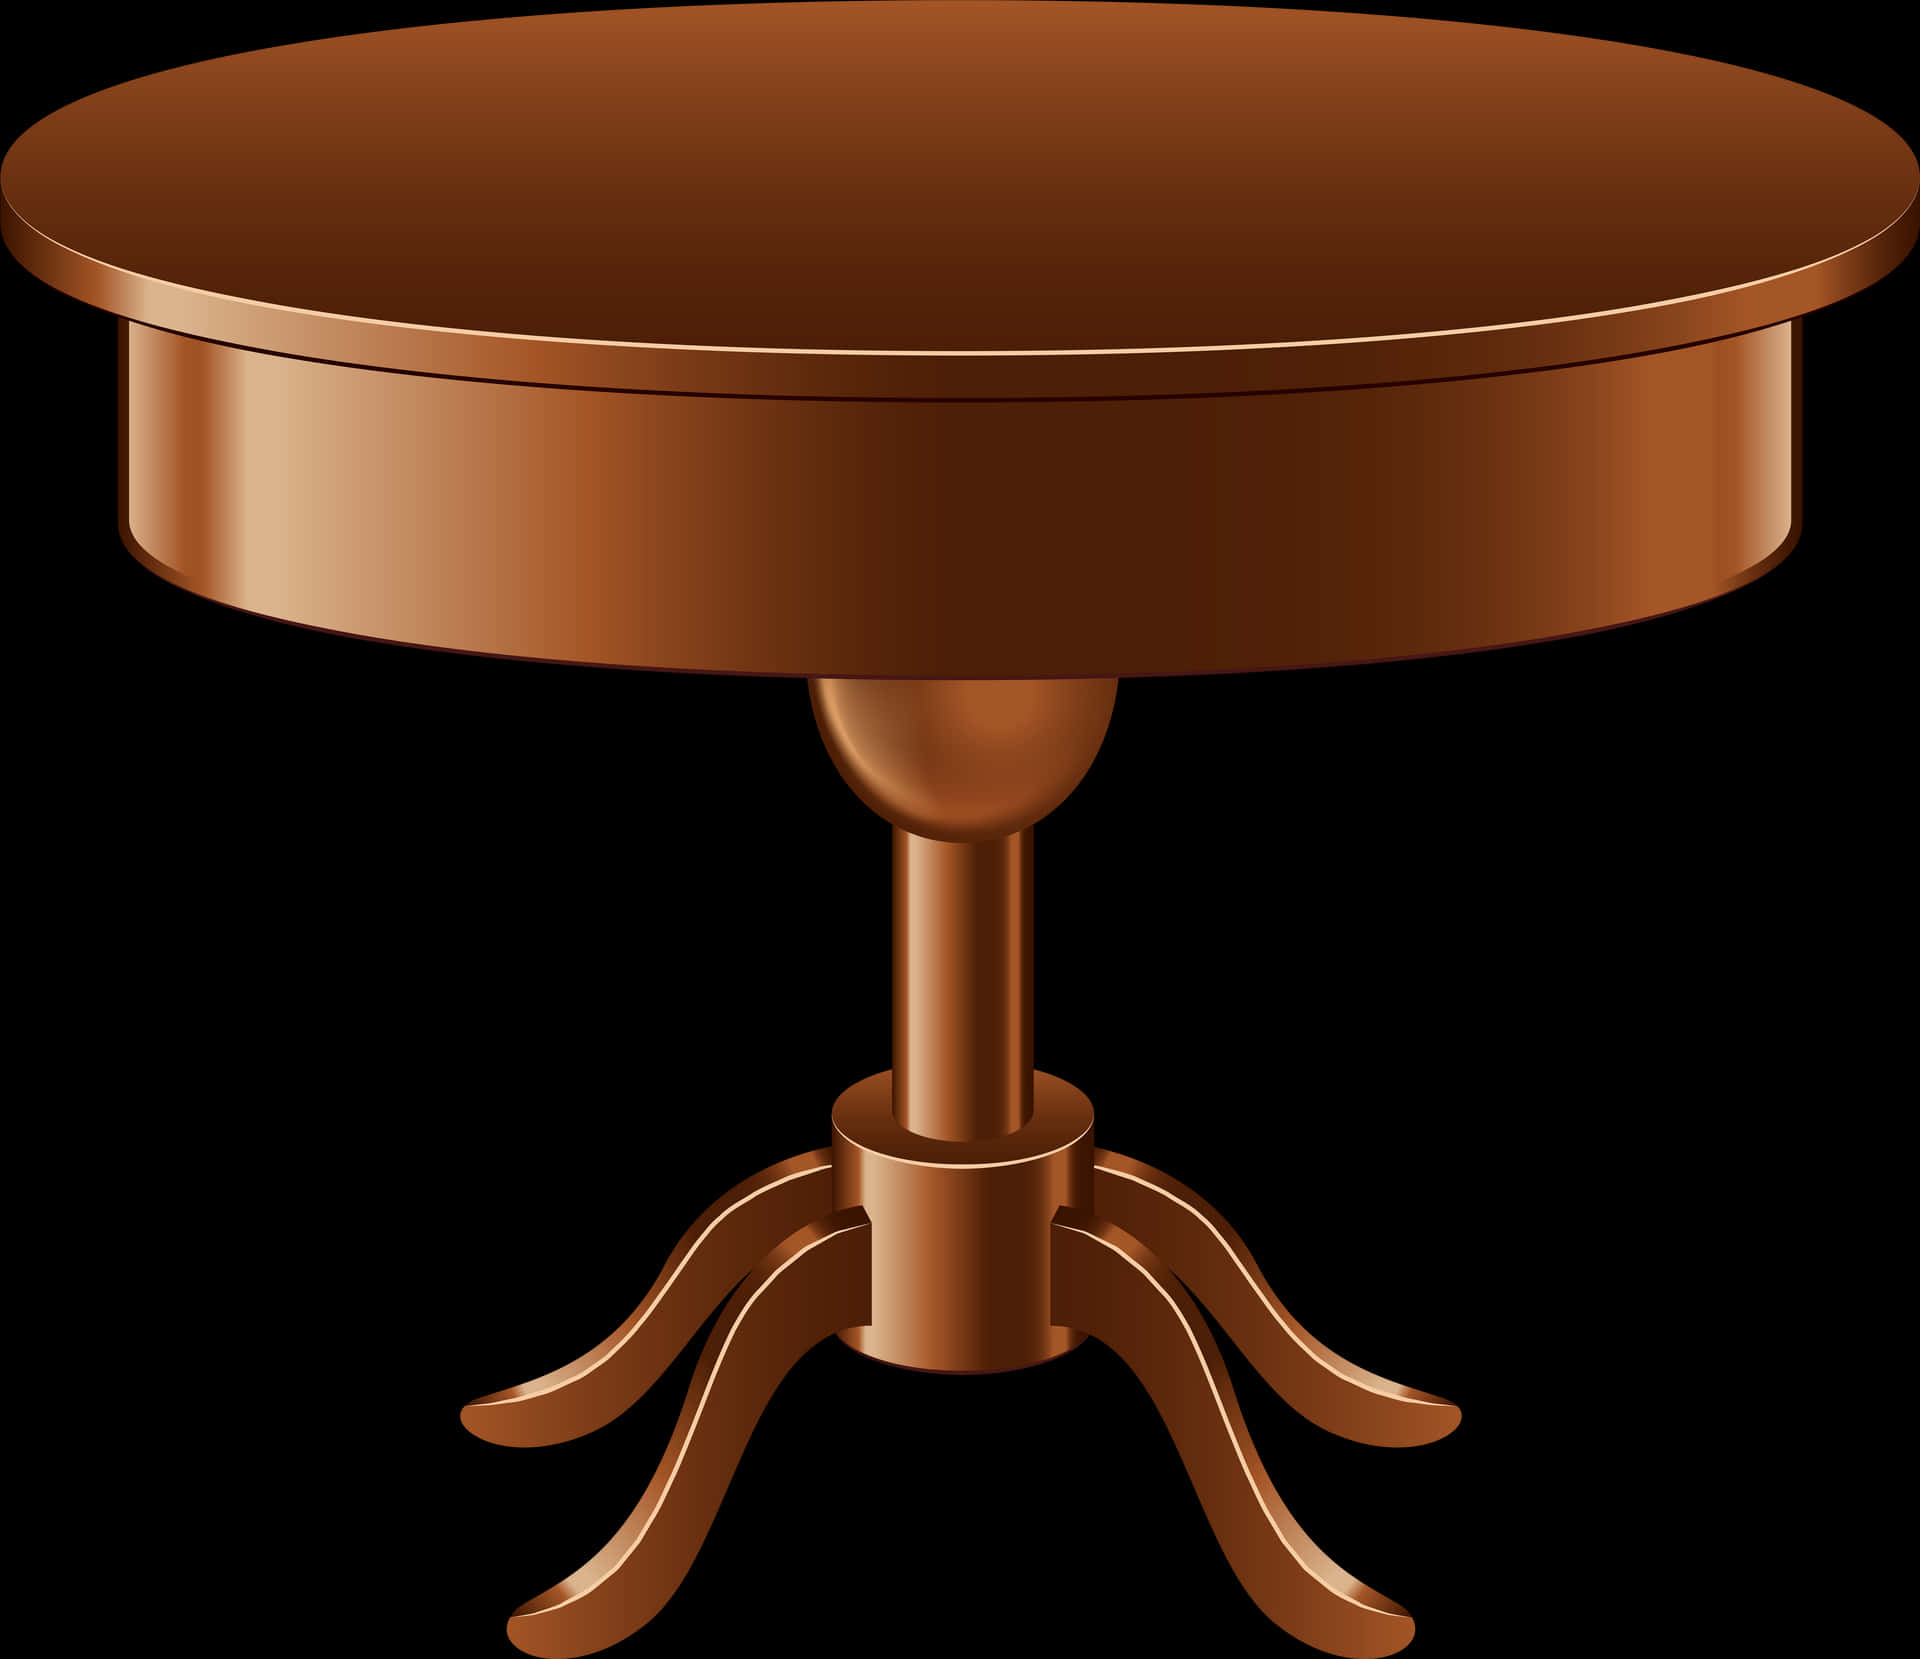 Round Wooden Table Illustration PNG